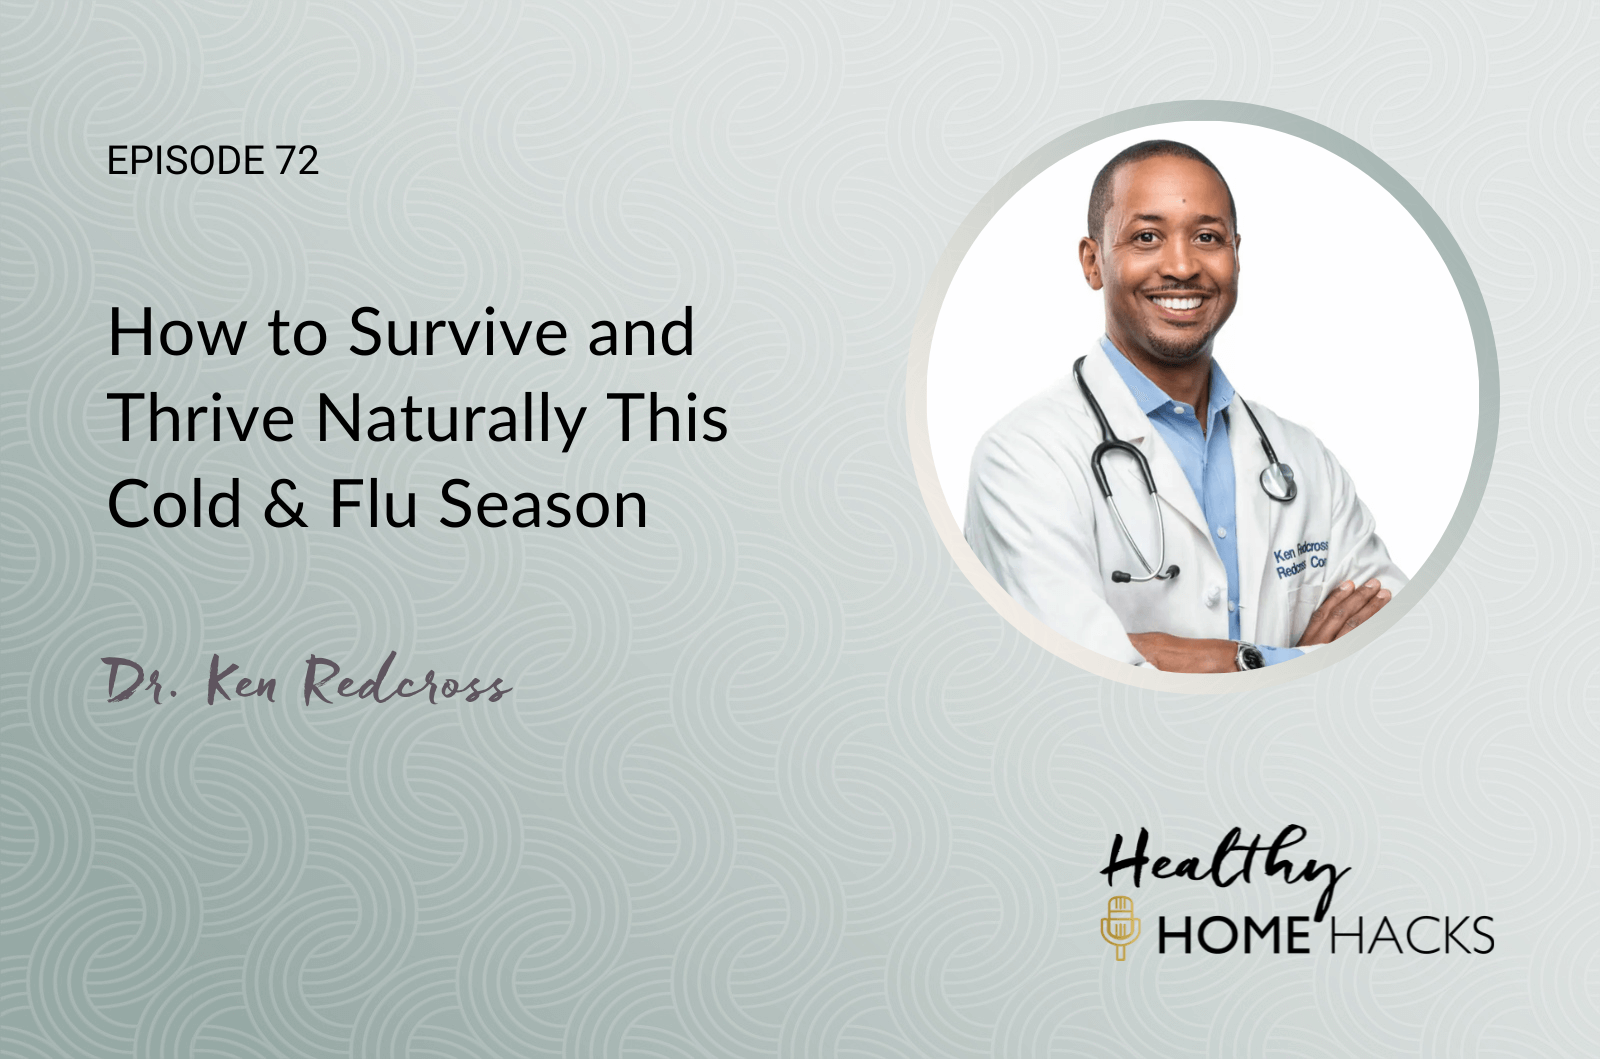 How to Survive and Thrive Naturally This Cold & Flu Season